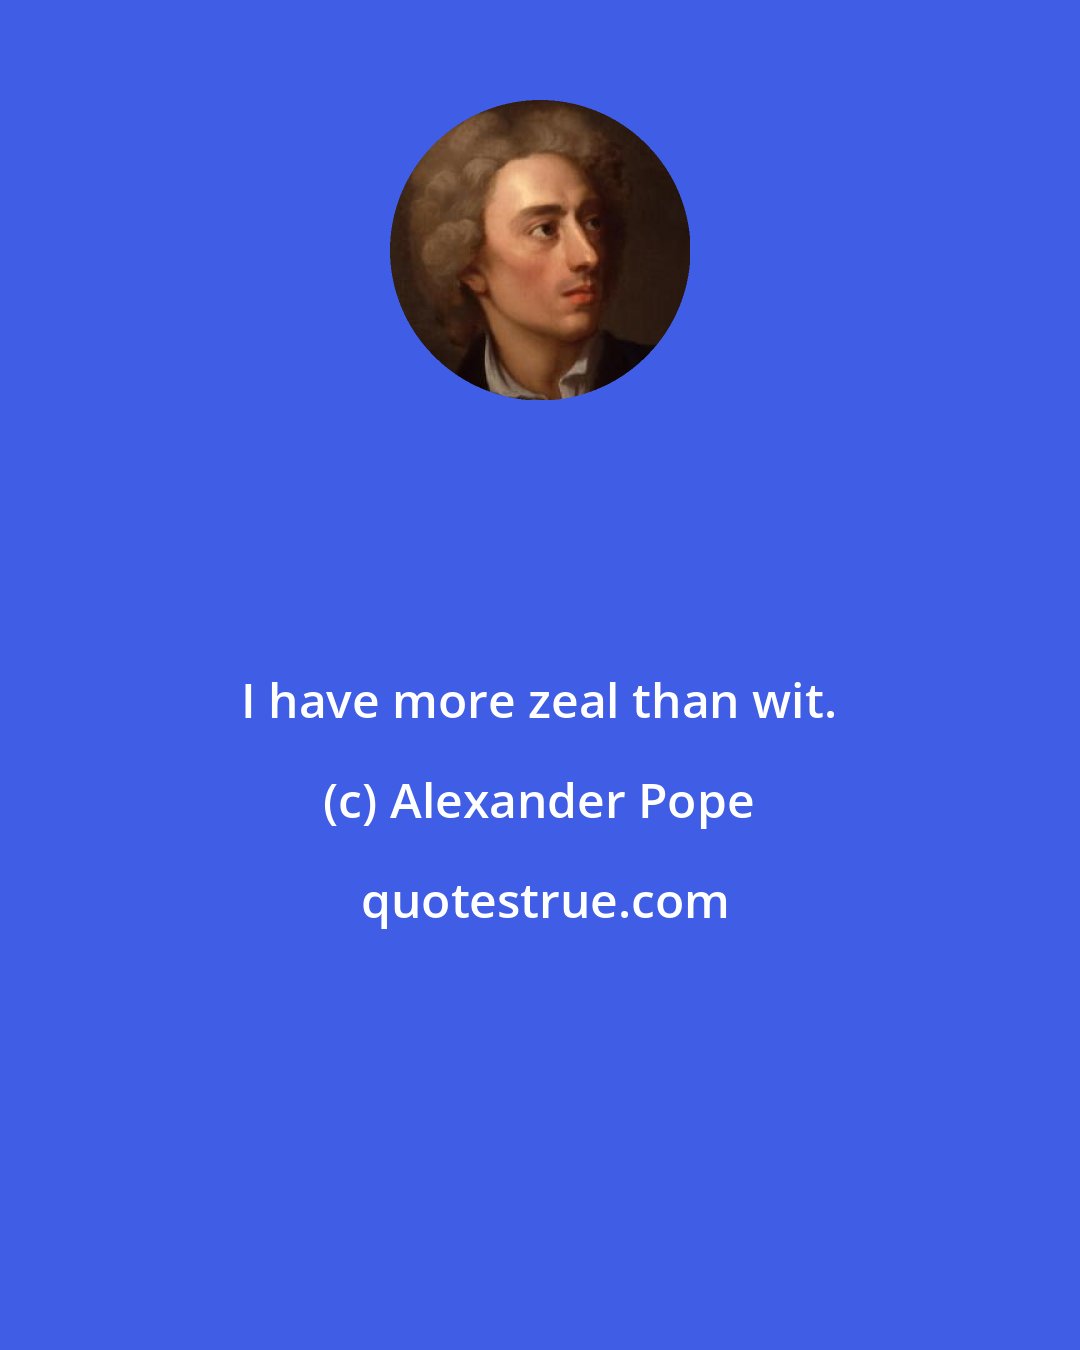 Alexander Pope: I have more zeal than wit.